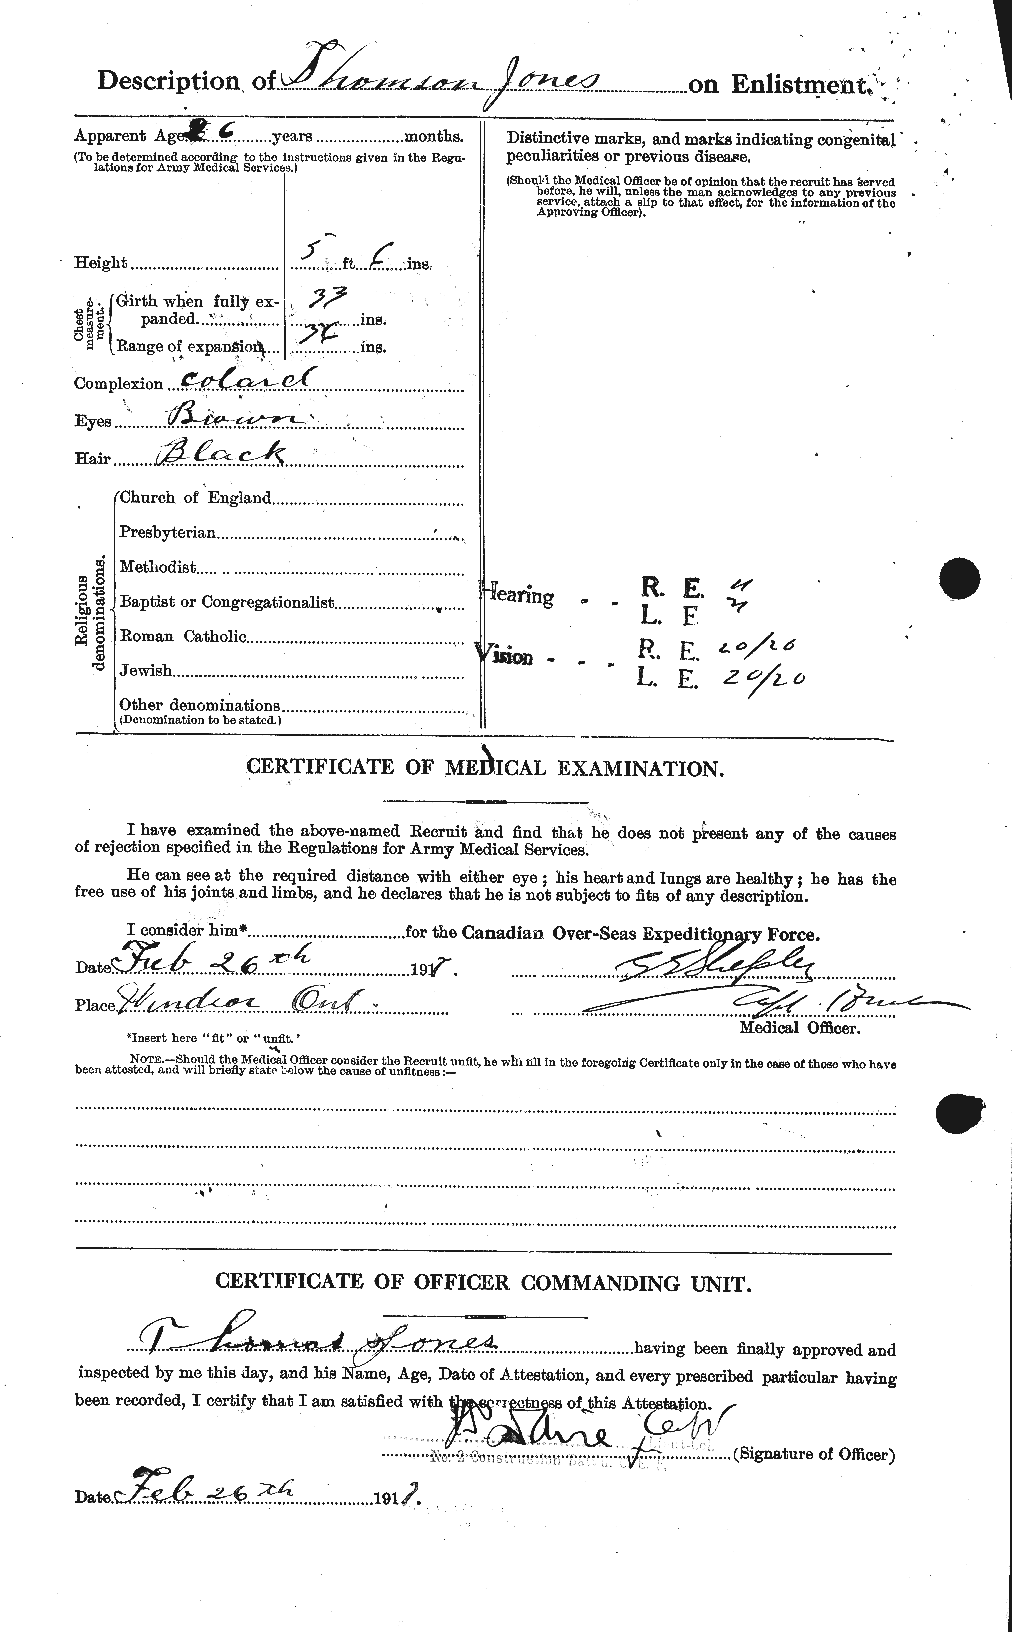 Personnel Records of the First World War - CEF 426665b